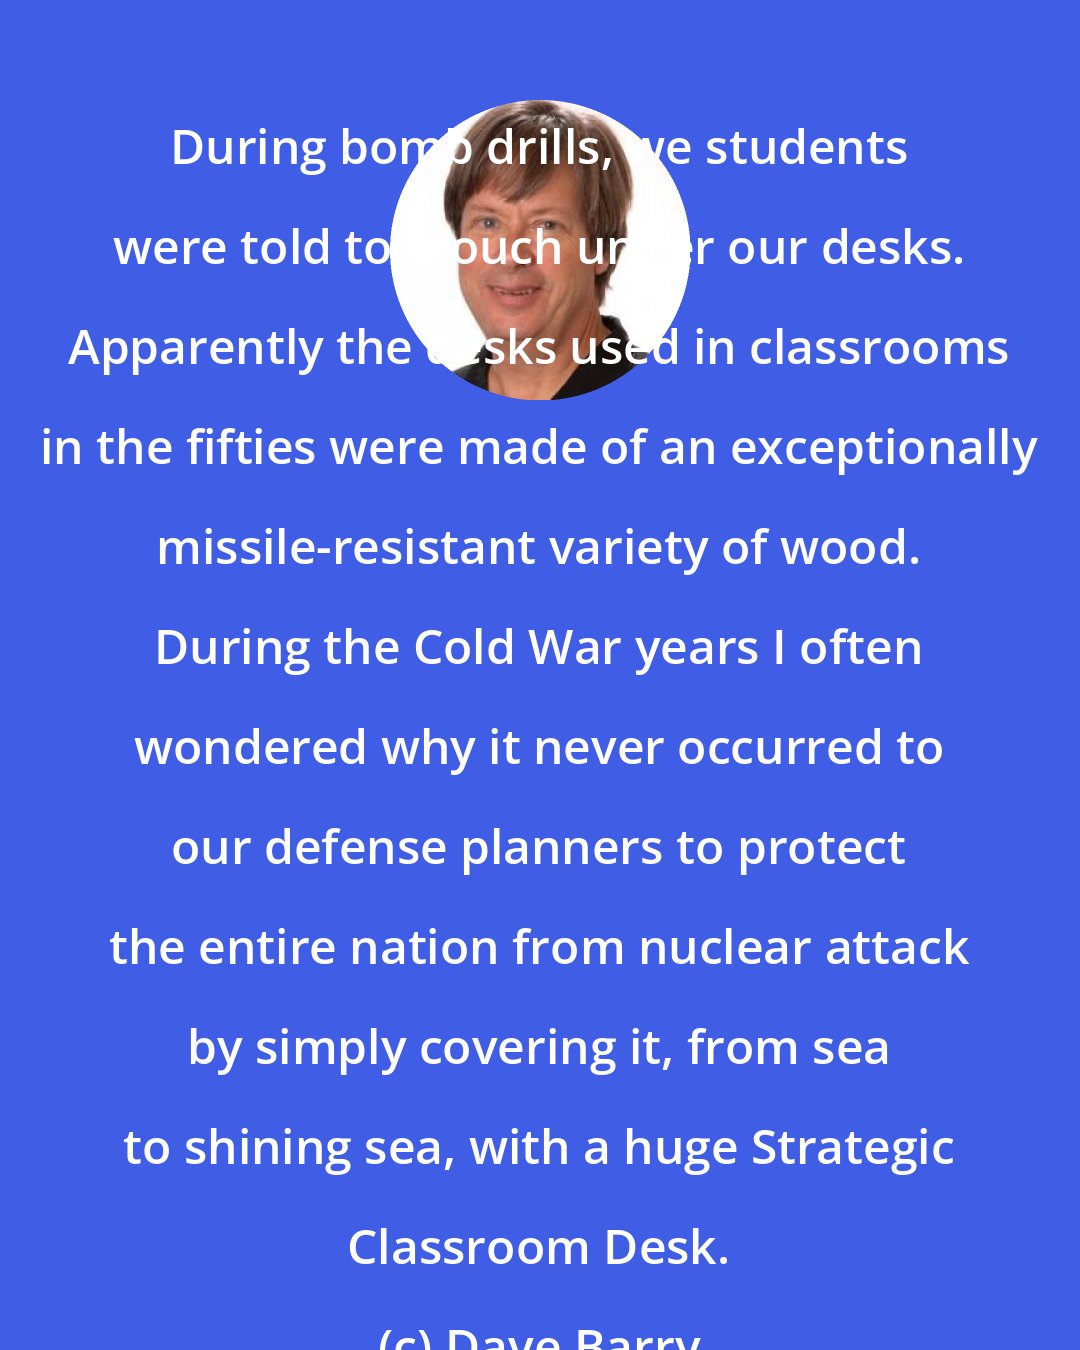 Dave Barry: During bomb drills, we students were told to crouch under our desks. Apparently the desks used in classrooms in the fifties were made of an exceptionally missile-resistant variety of wood. During the Cold War years I often wondered why it never occurred to our defense planners to protect the entire nation from nuclear attack by simply covering it, from sea to shining sea, with a huge Strategic Classroom Desk.